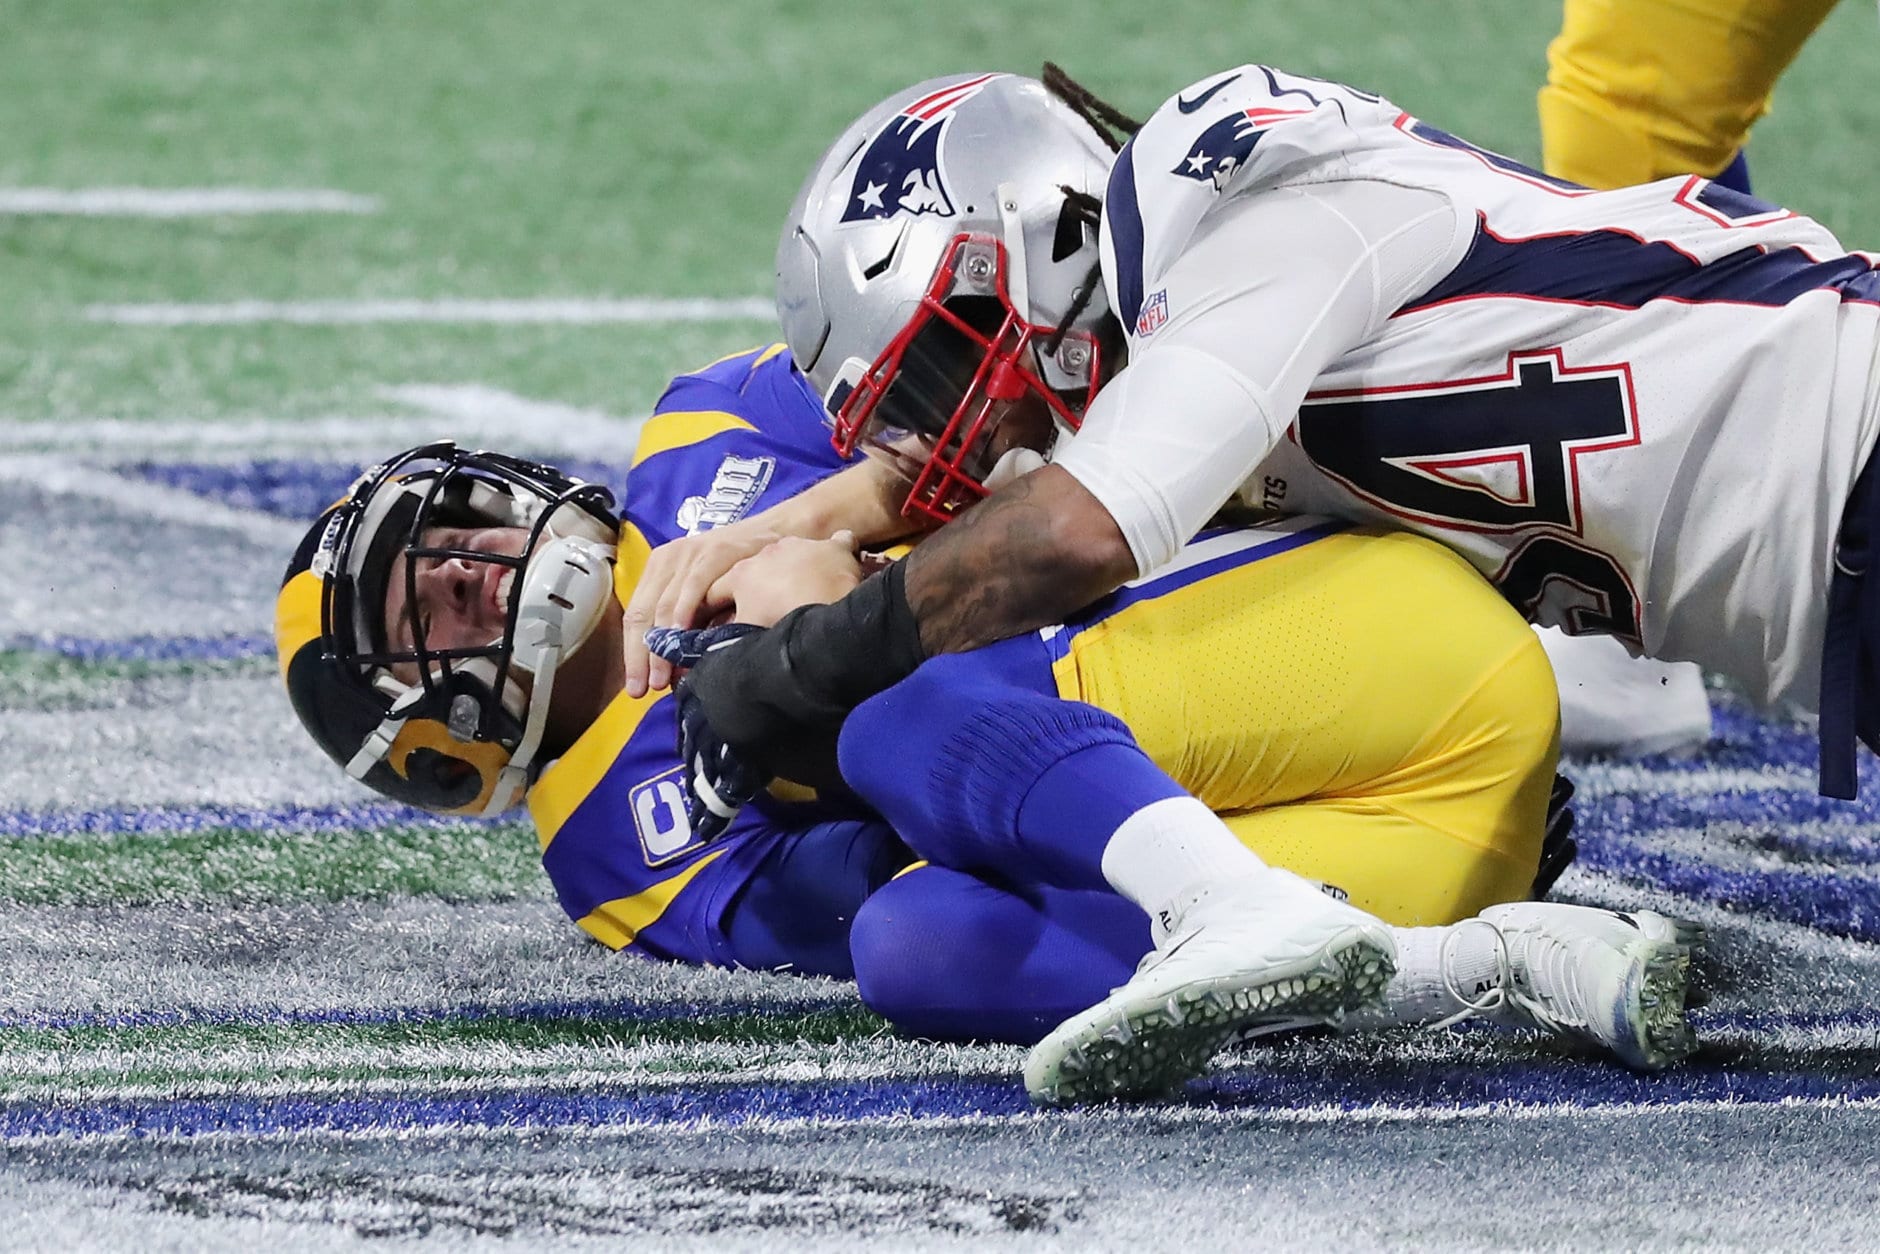 ATLANTA, GA - FEBRUARY 03:  Dont'a Hightower #54 of the New England Patriots sacks Jared Goff #16 of the Los Angeles Rams in the first half during Super Bowl LIII at Mercedes-Benz Stadium on February 3, 2019 in Atlanta, Georgia.  (Photo by Elsa/Getty Images)